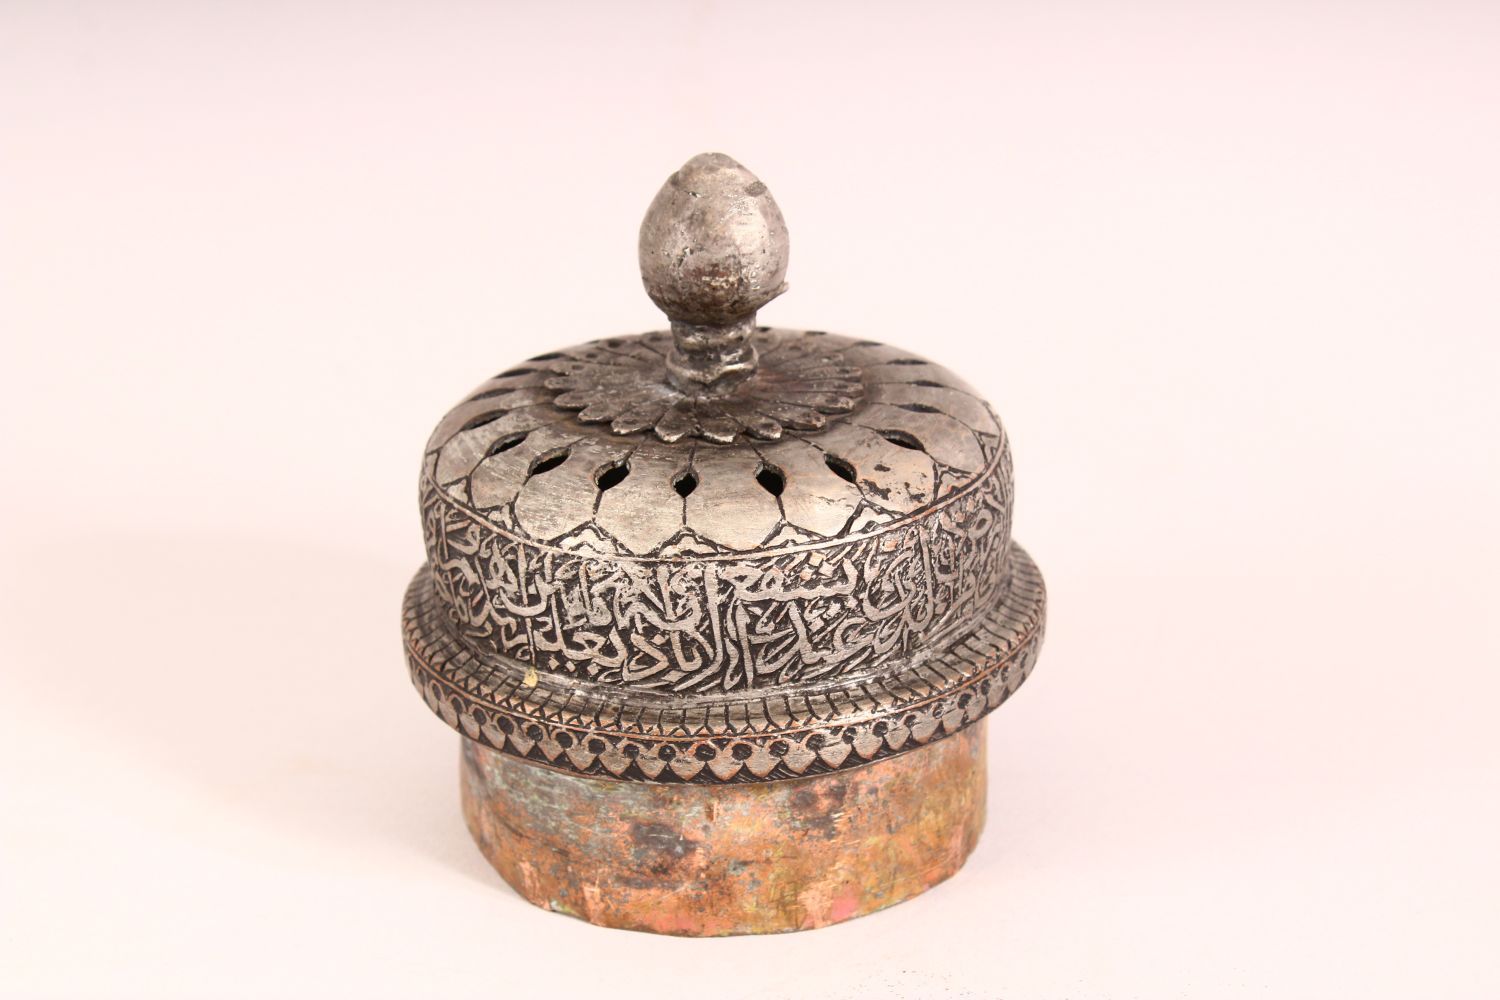 A GOOD PERSIAN TINNED COPPER LIDDED URN - the body carved with figures, animals and flora, with a - Image 5 of 8